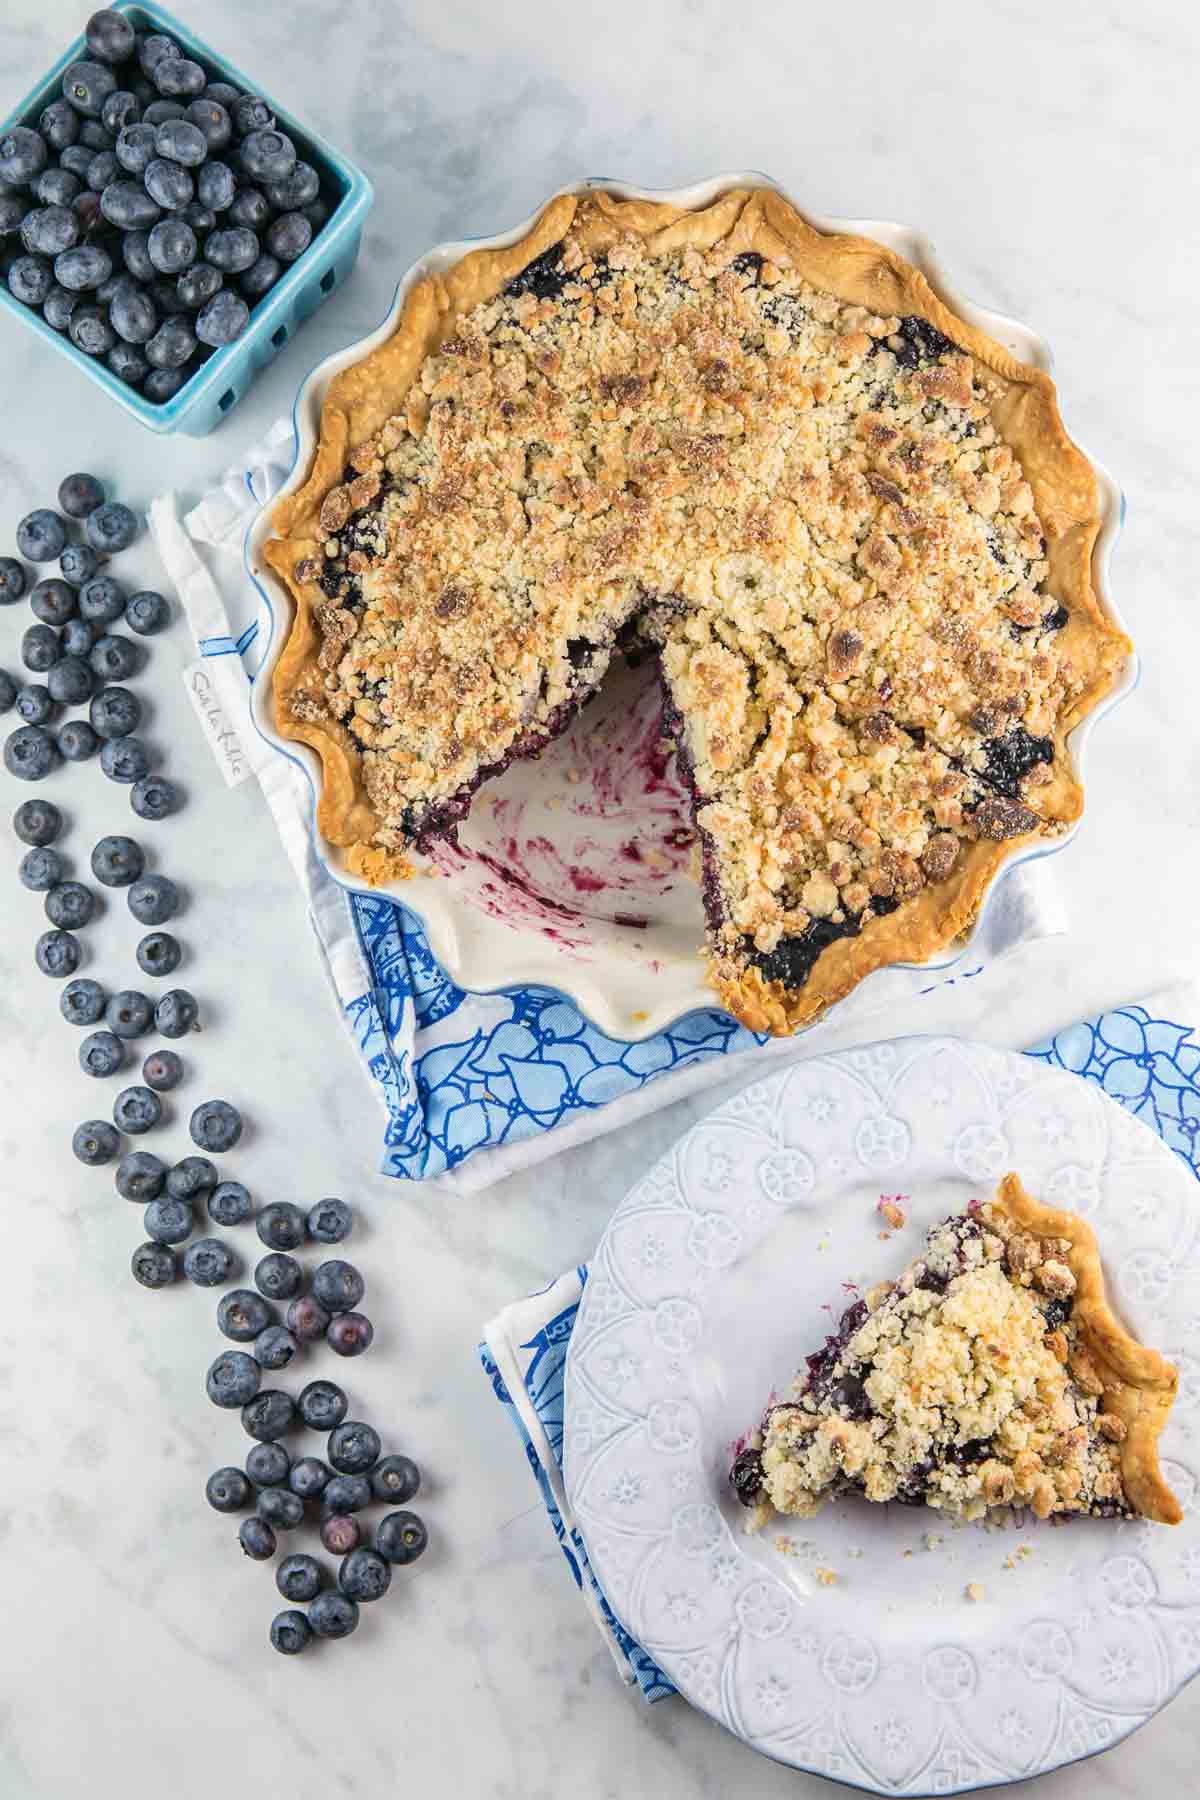 Almond Crumble Blueberry Pie: fresh blueberries covered with a crunchy almond paste crumble. Perfect with fresh summer blueberries... or even use frozen. {Bunsen Burner Bakery} #pie #blueberrypie #almond #fruitpies